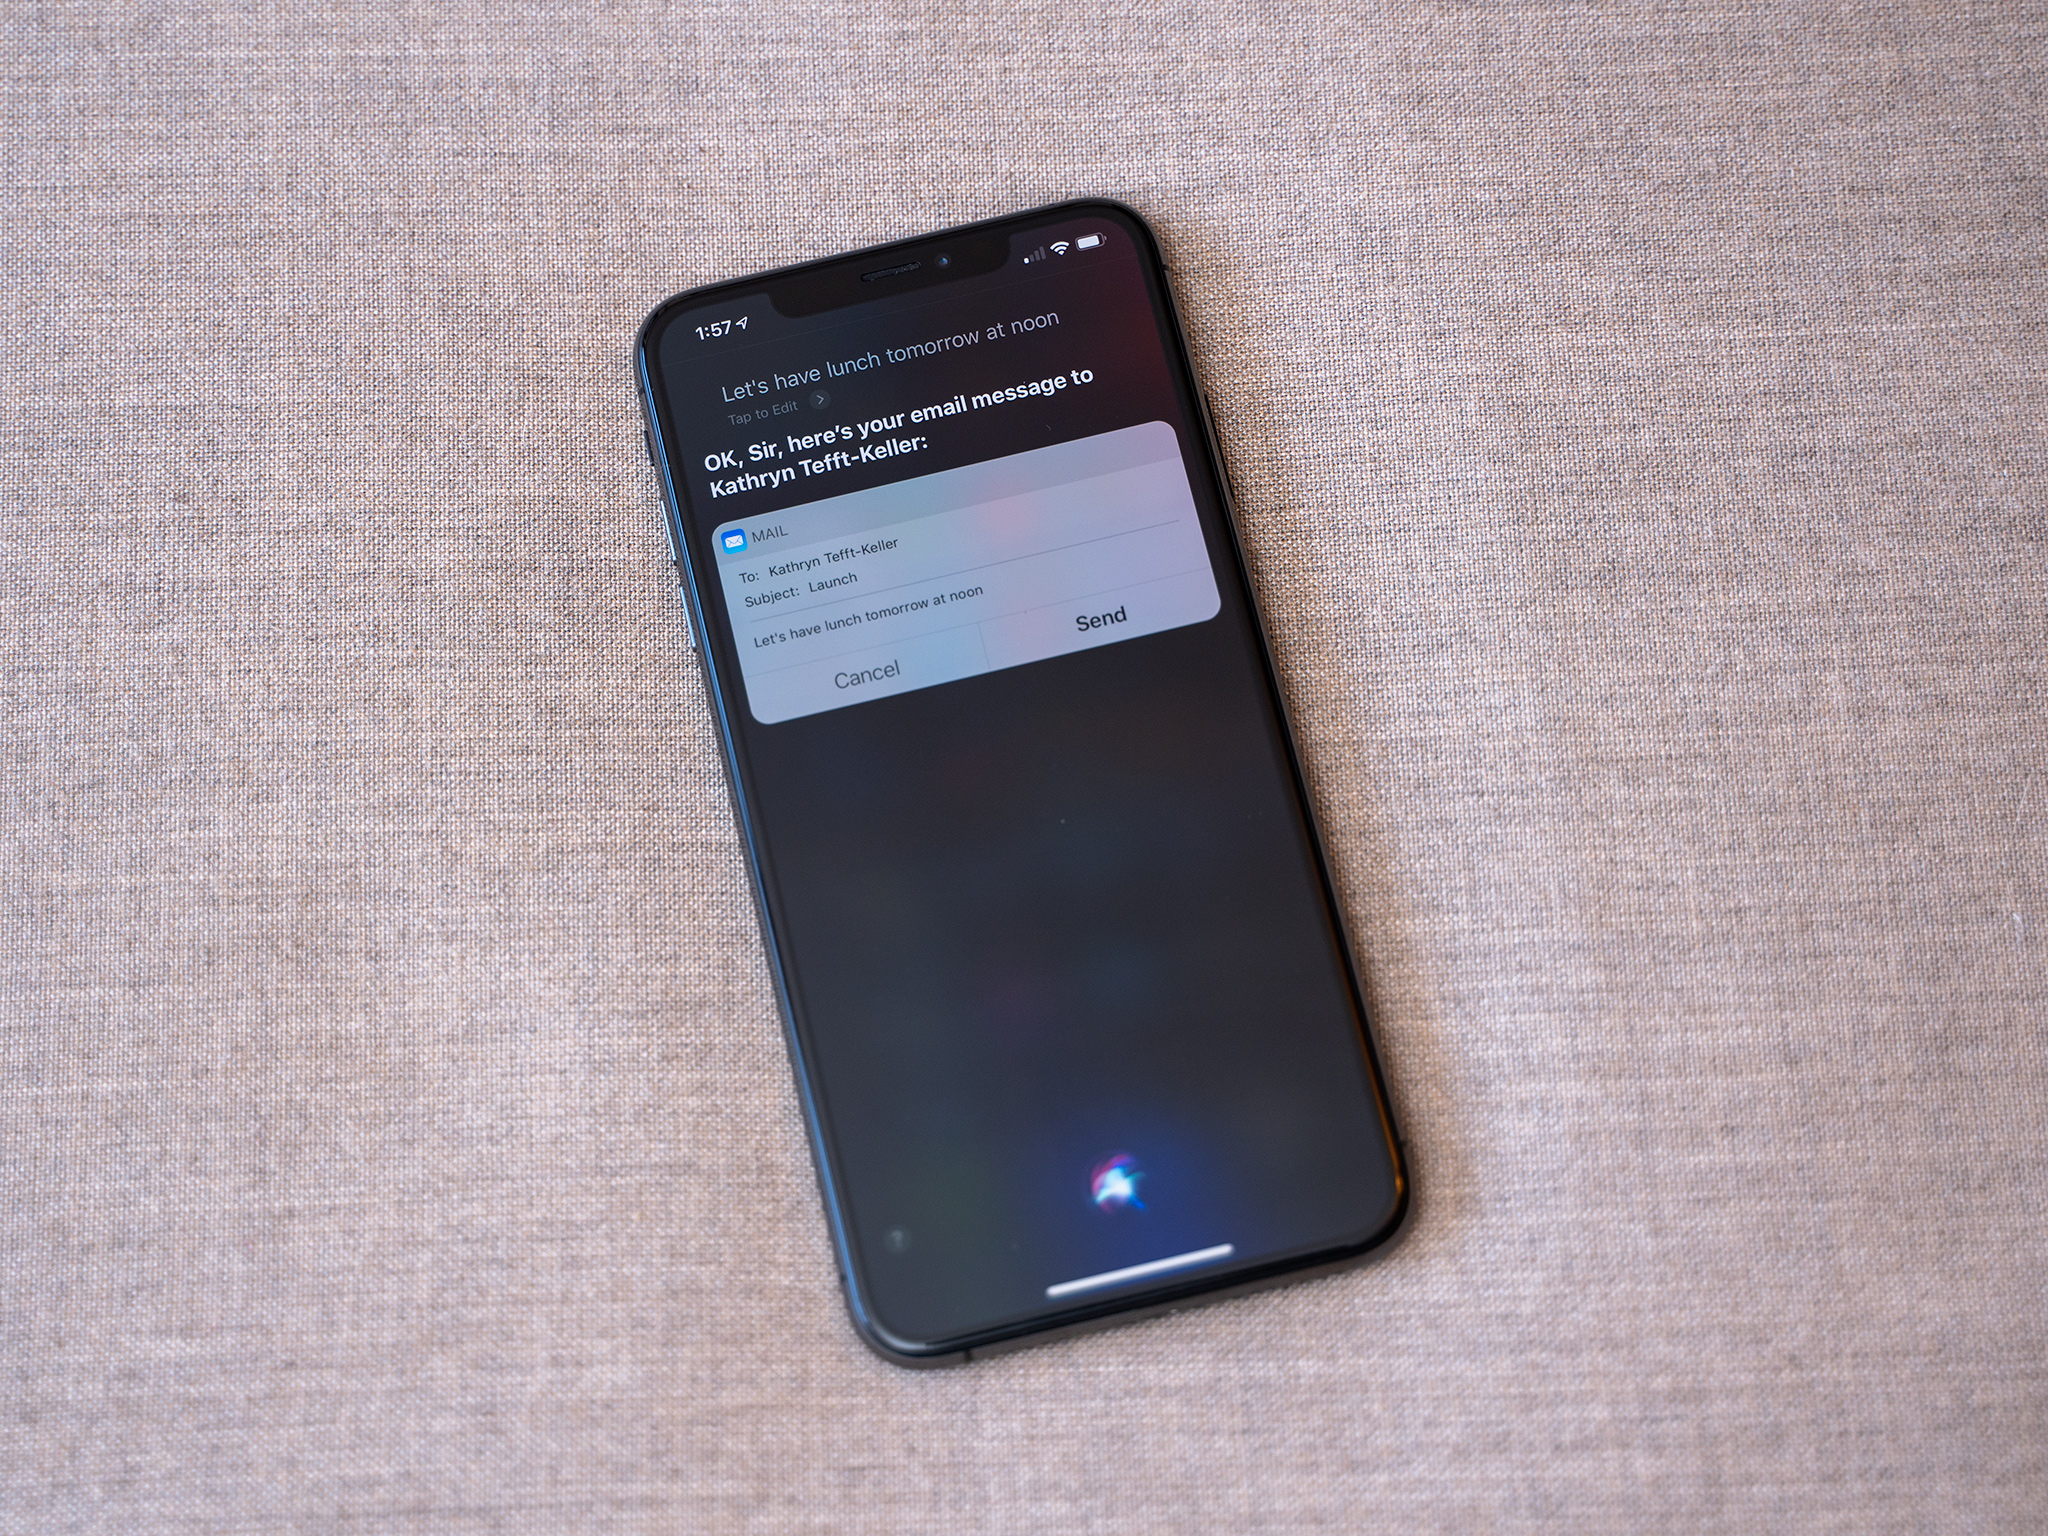 How to call, message, and email your contacts using Siri